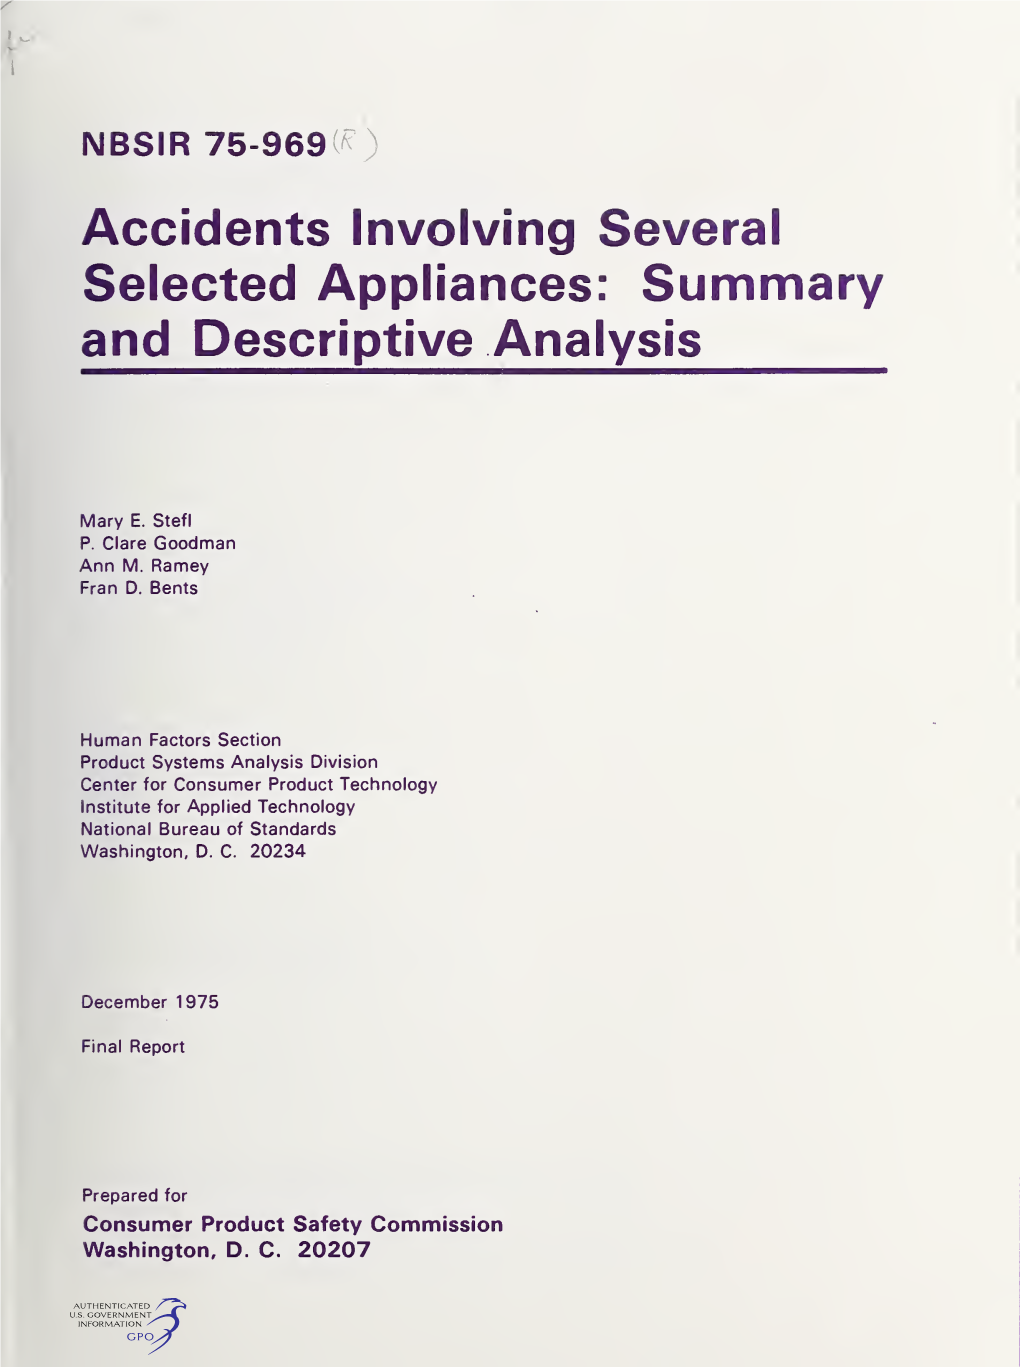 Accidents Involving Several Selected Appliances: Summary and Descriptive Analysis